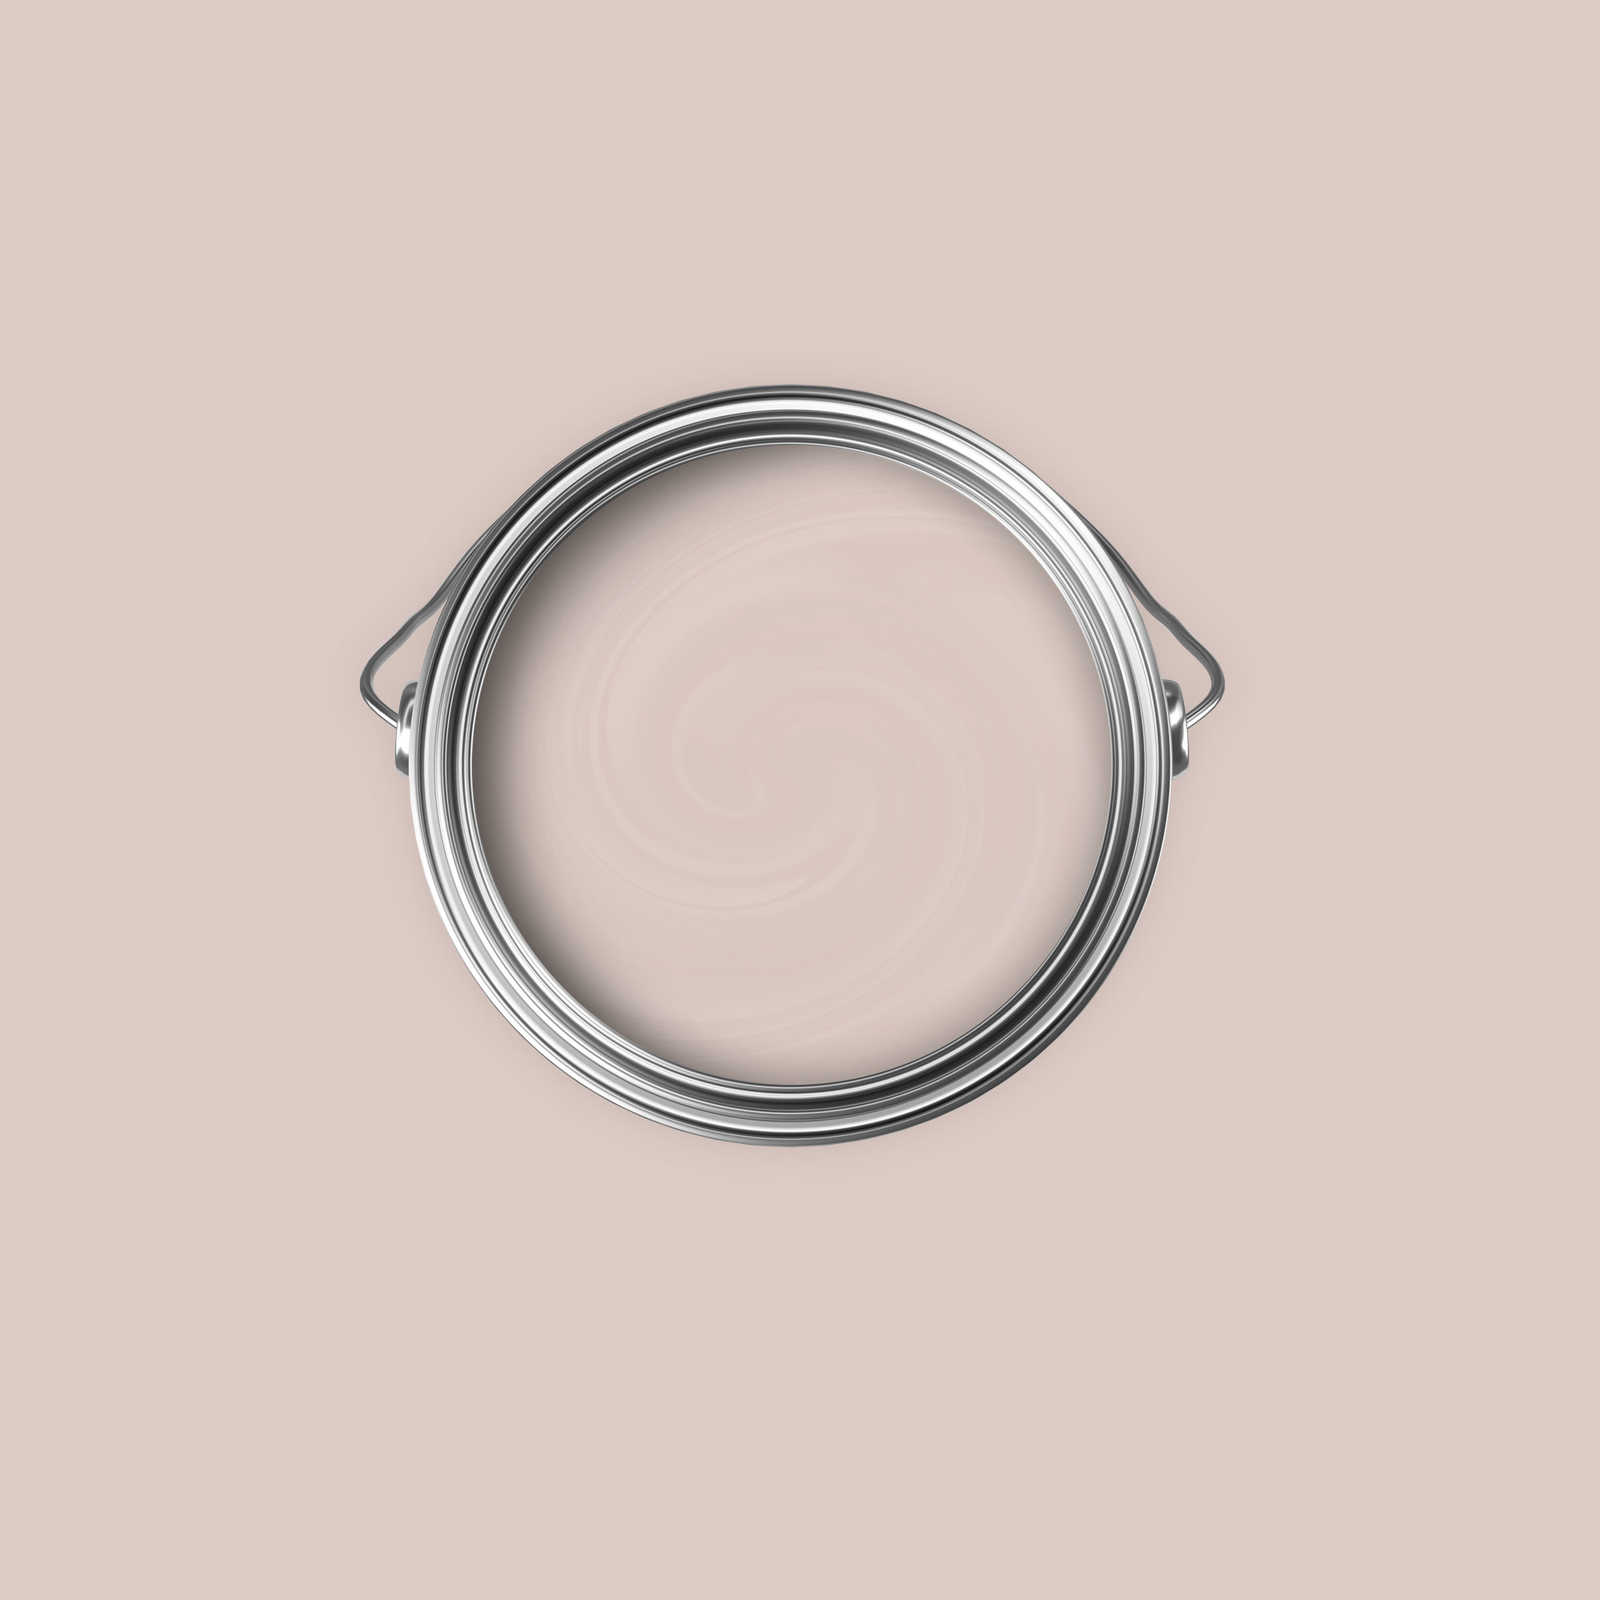             Premium Wall Paint Soothing Old Pink »Natural Nude« NW1008 – 2.5 litre
        